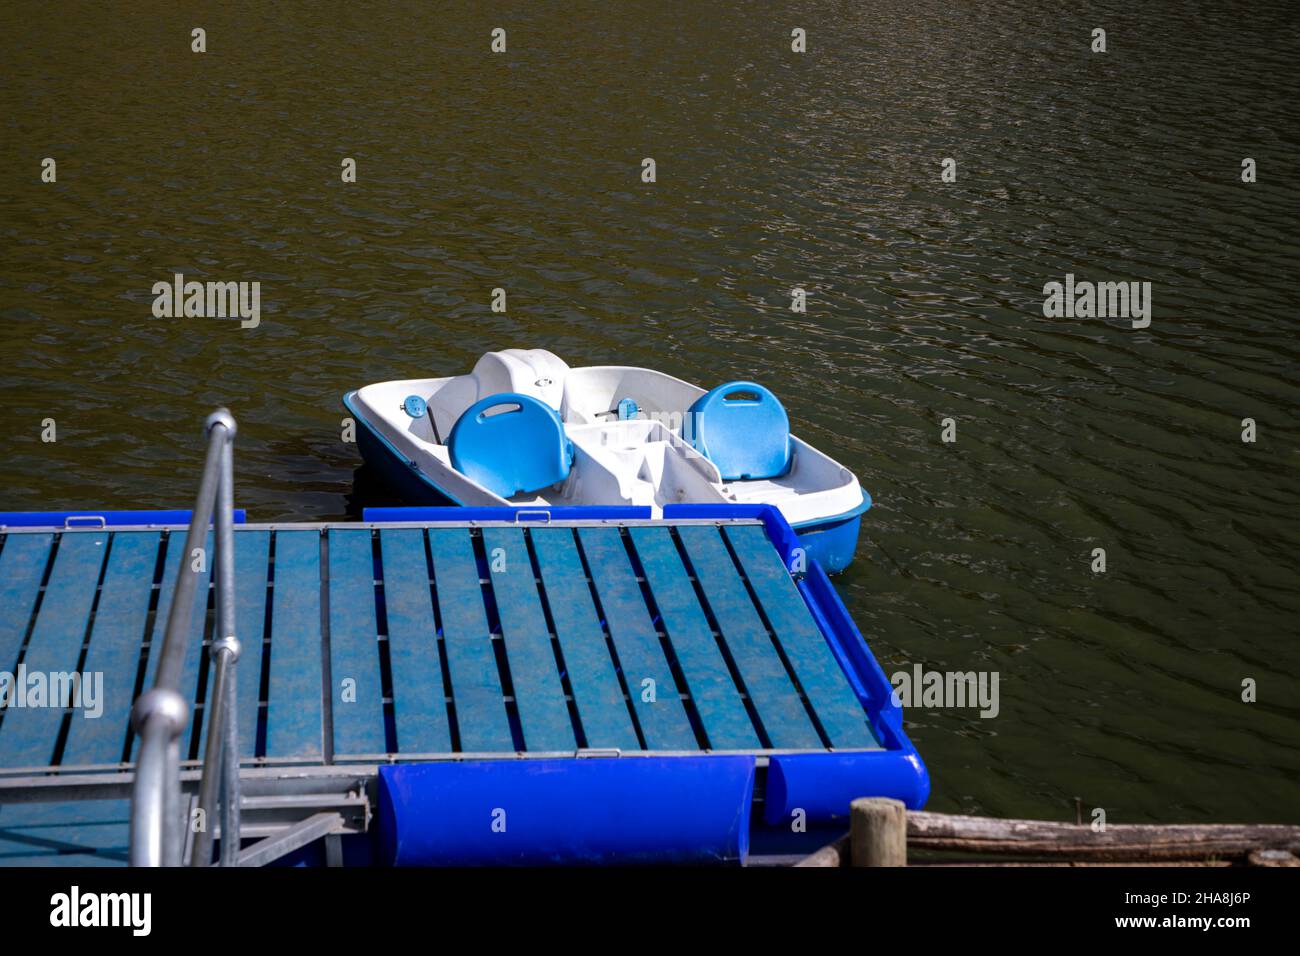 Single plastic pedal boat moored to a plastic jetty in the water Stock Photo